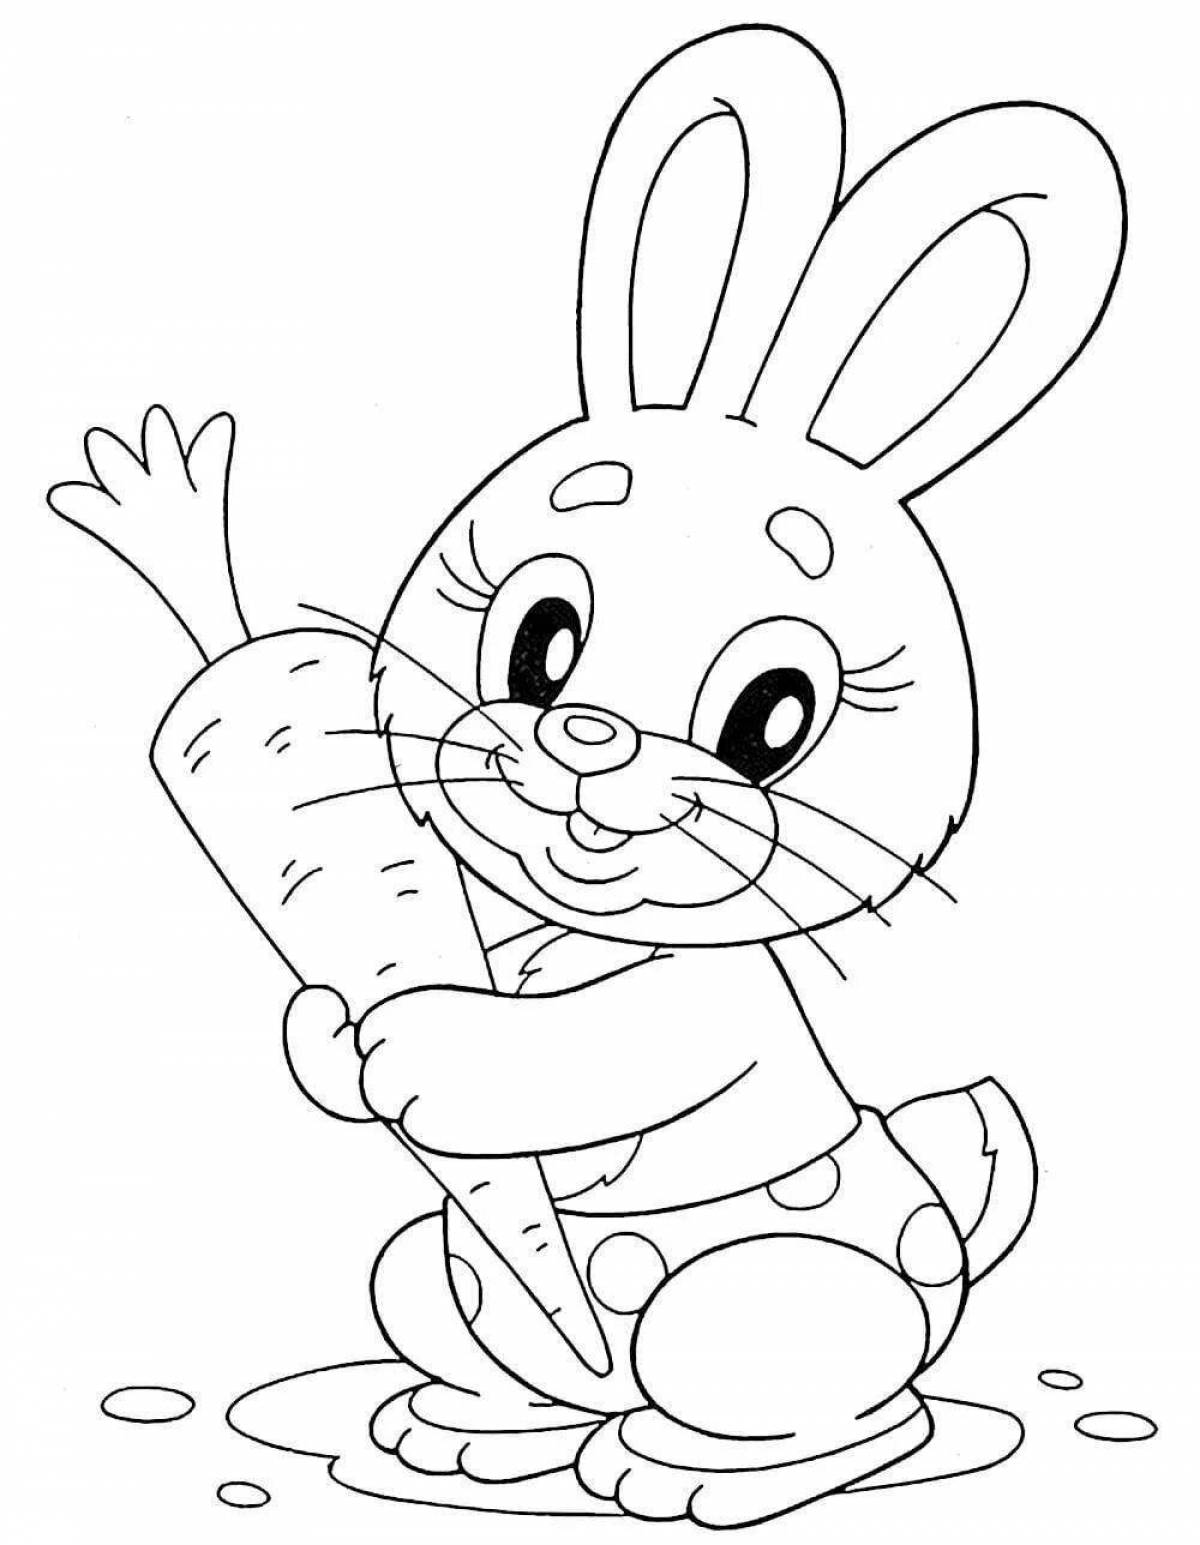 Magic rabbit coloring book for children 2-3 years old